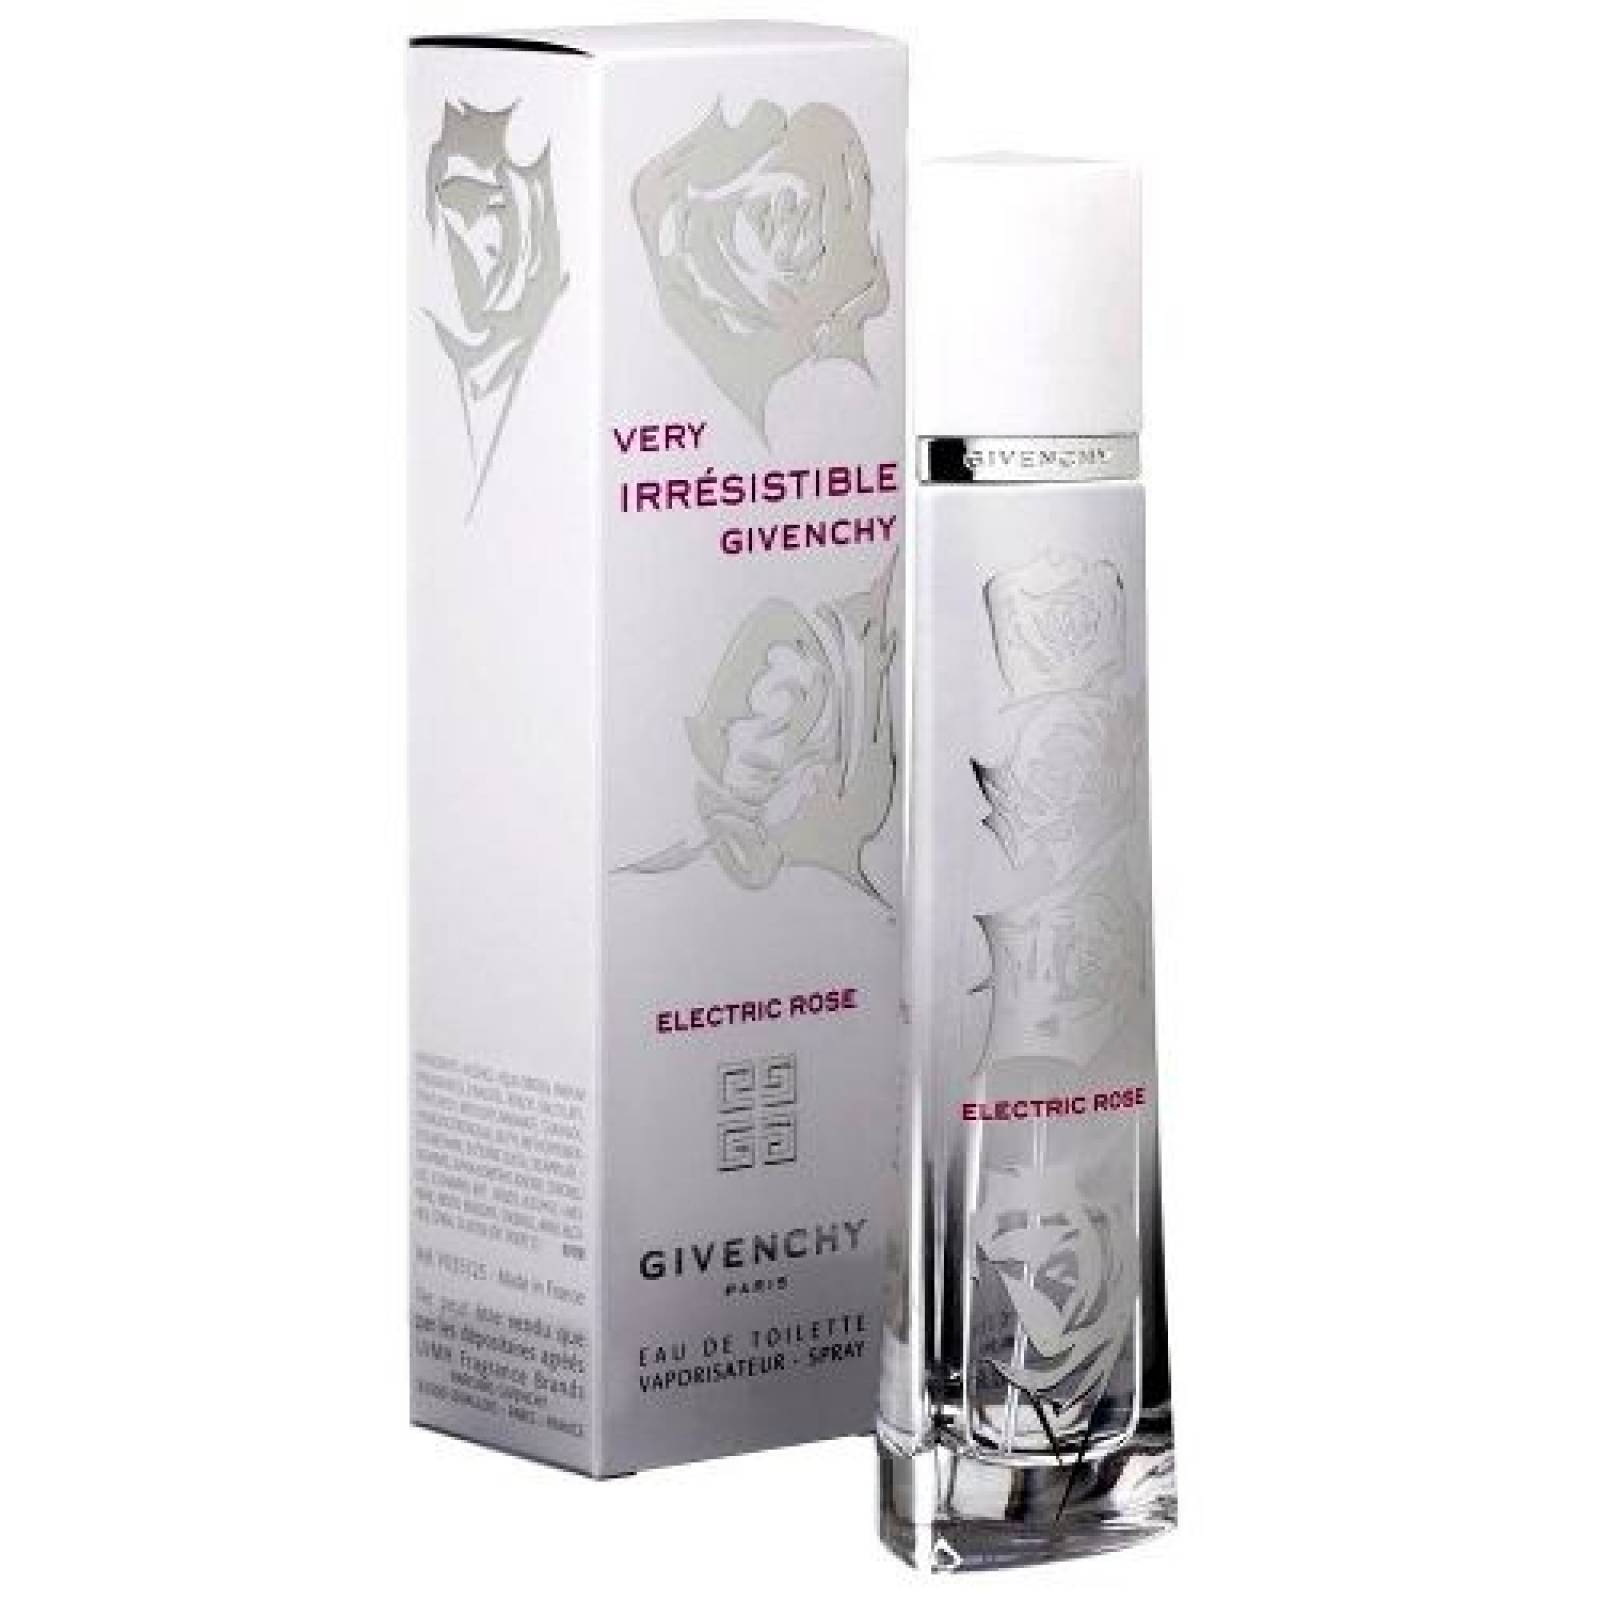 Very Irresistible Electric Rose Dama 75 Ml Givenchy